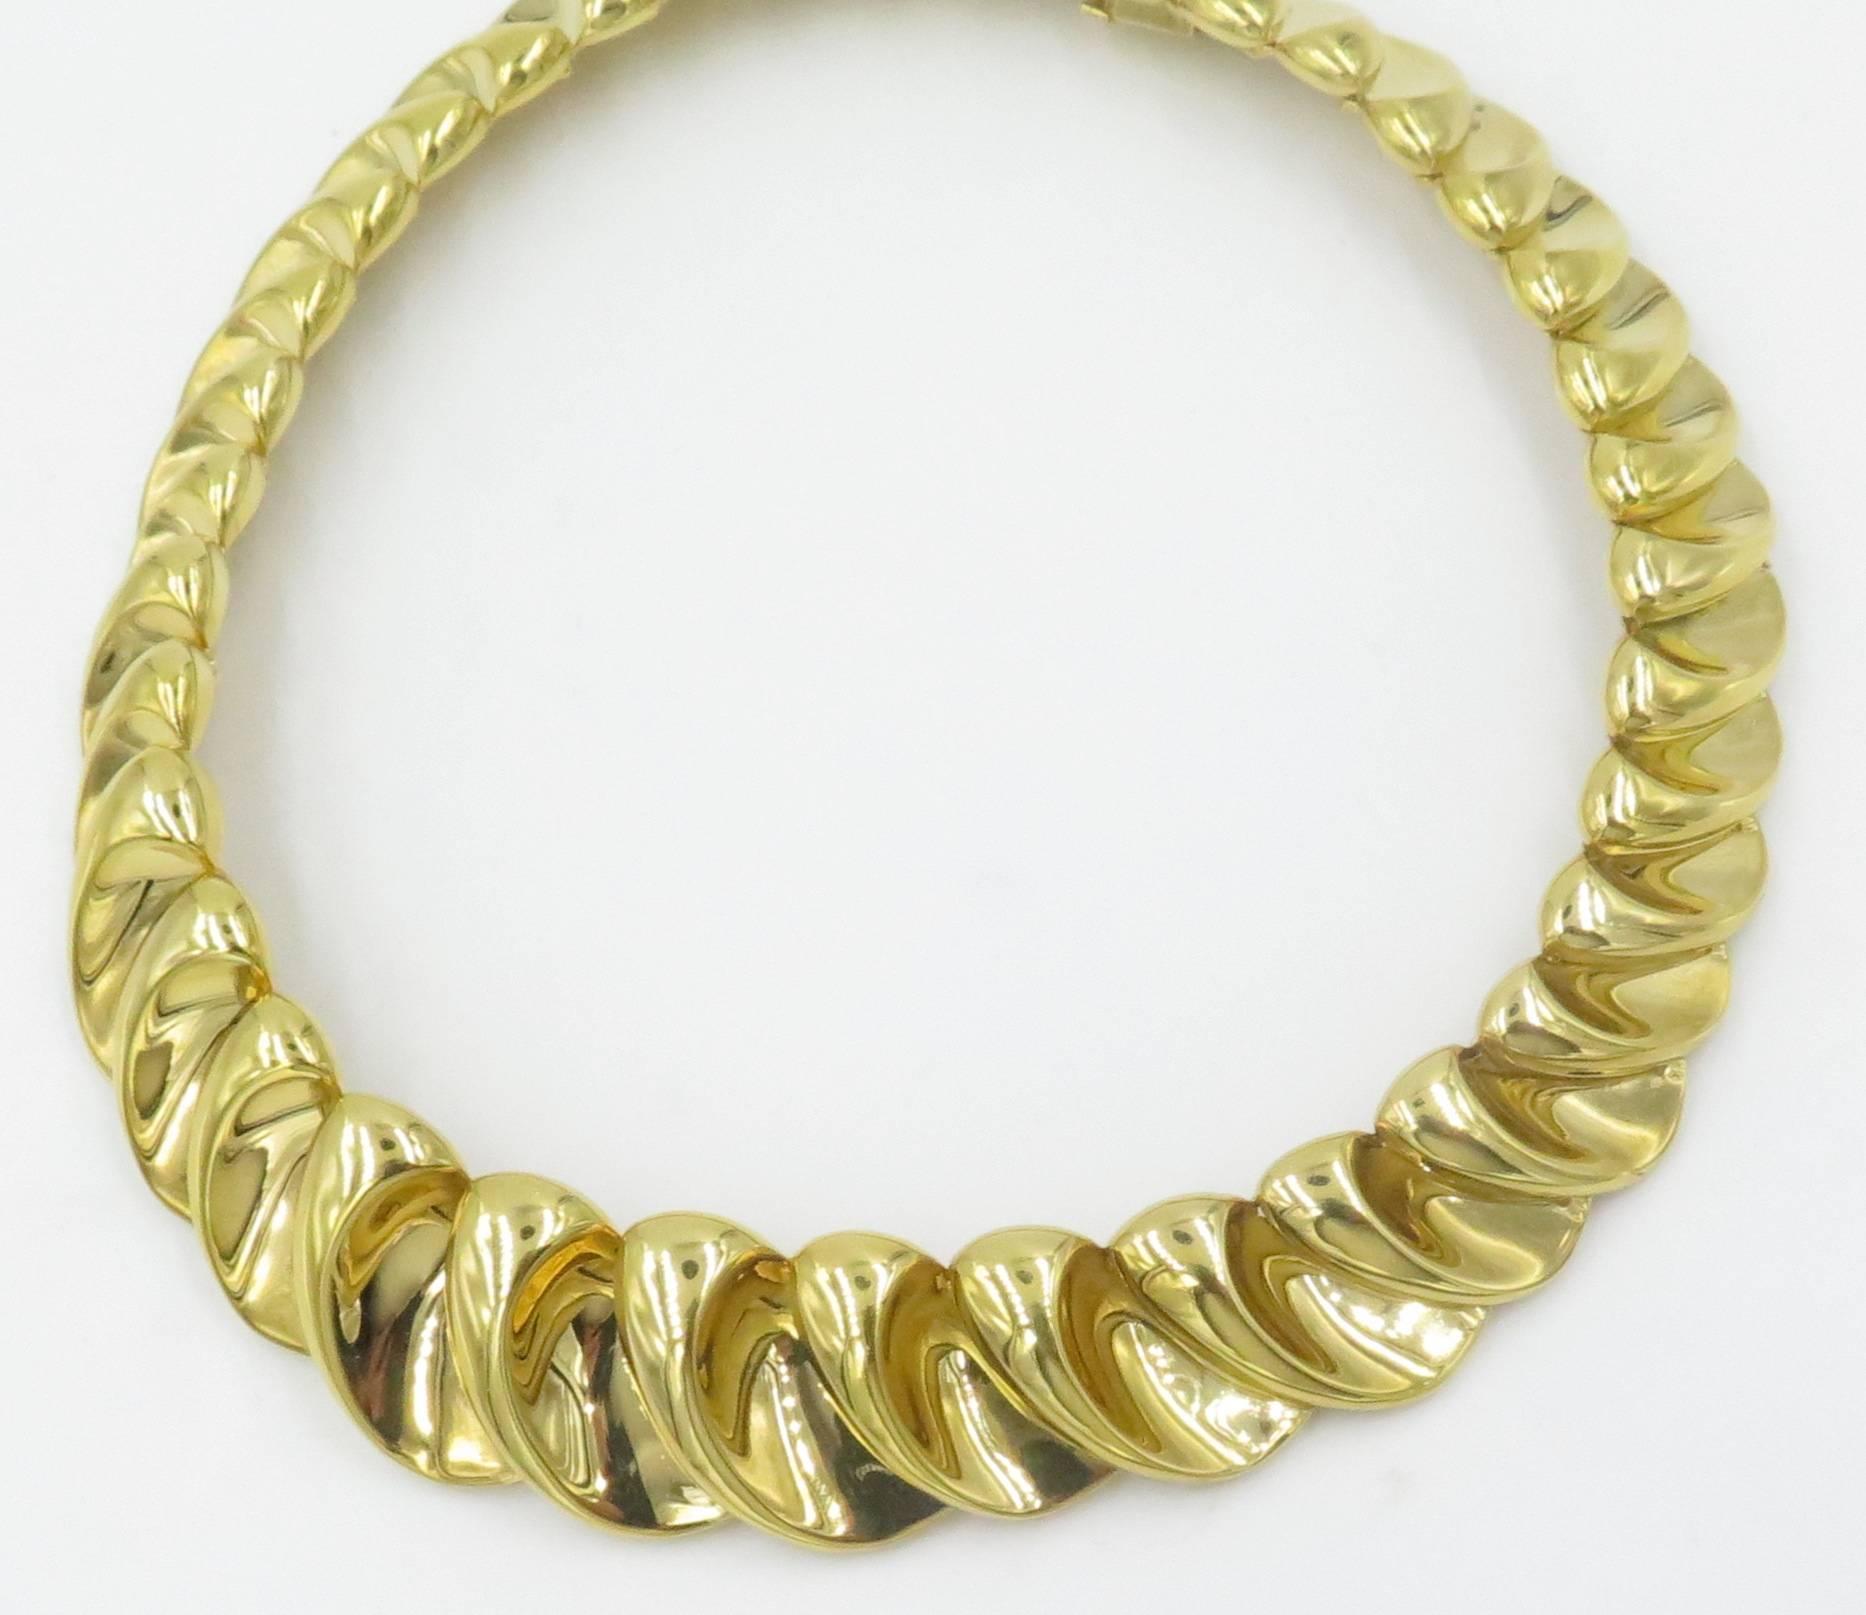 An 18 karat yellow gold necklace.  Circa 1970.  The collar designed as a line of graduated polished gold crescent shaped links. Length is 14 inches.  Gross weight approximately 119.9 grams